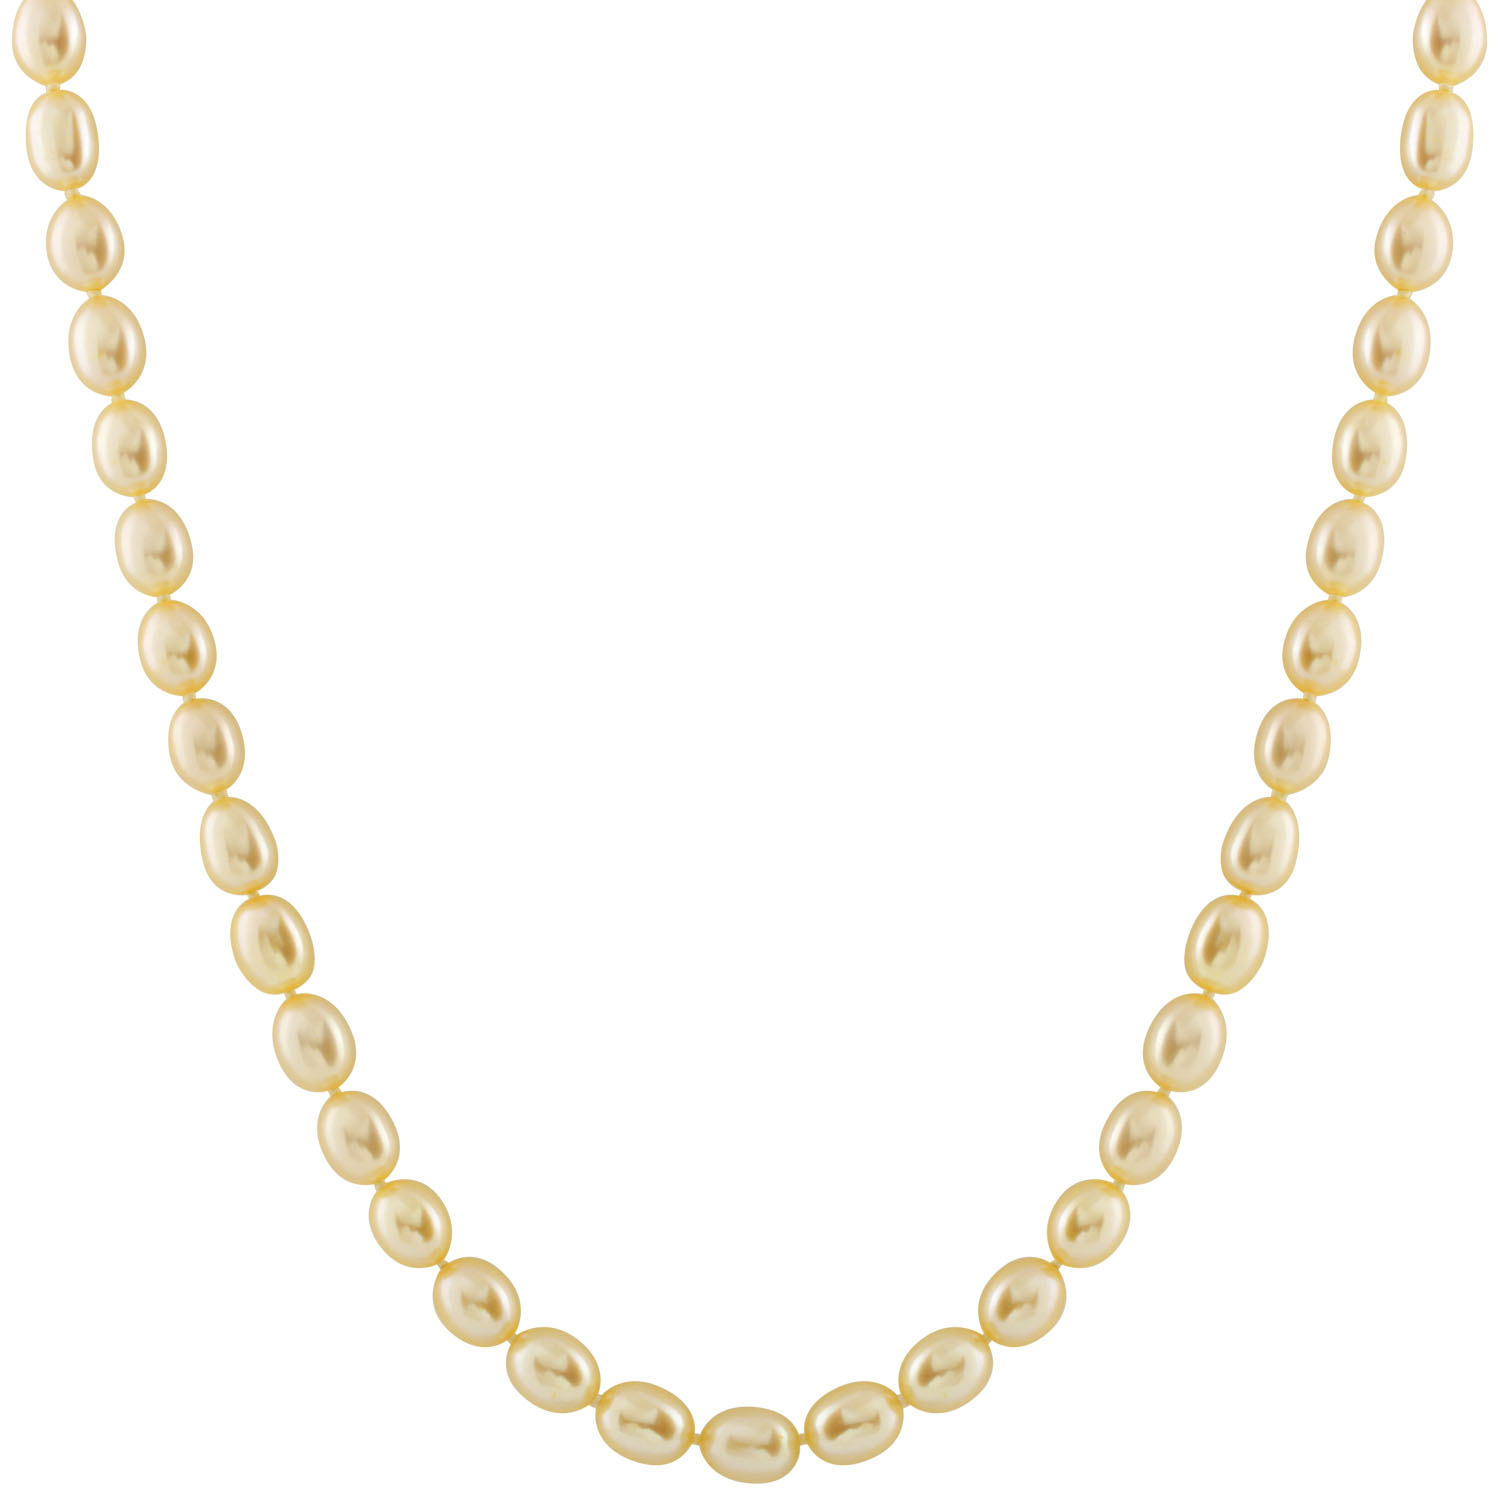 New rice pearl necklace